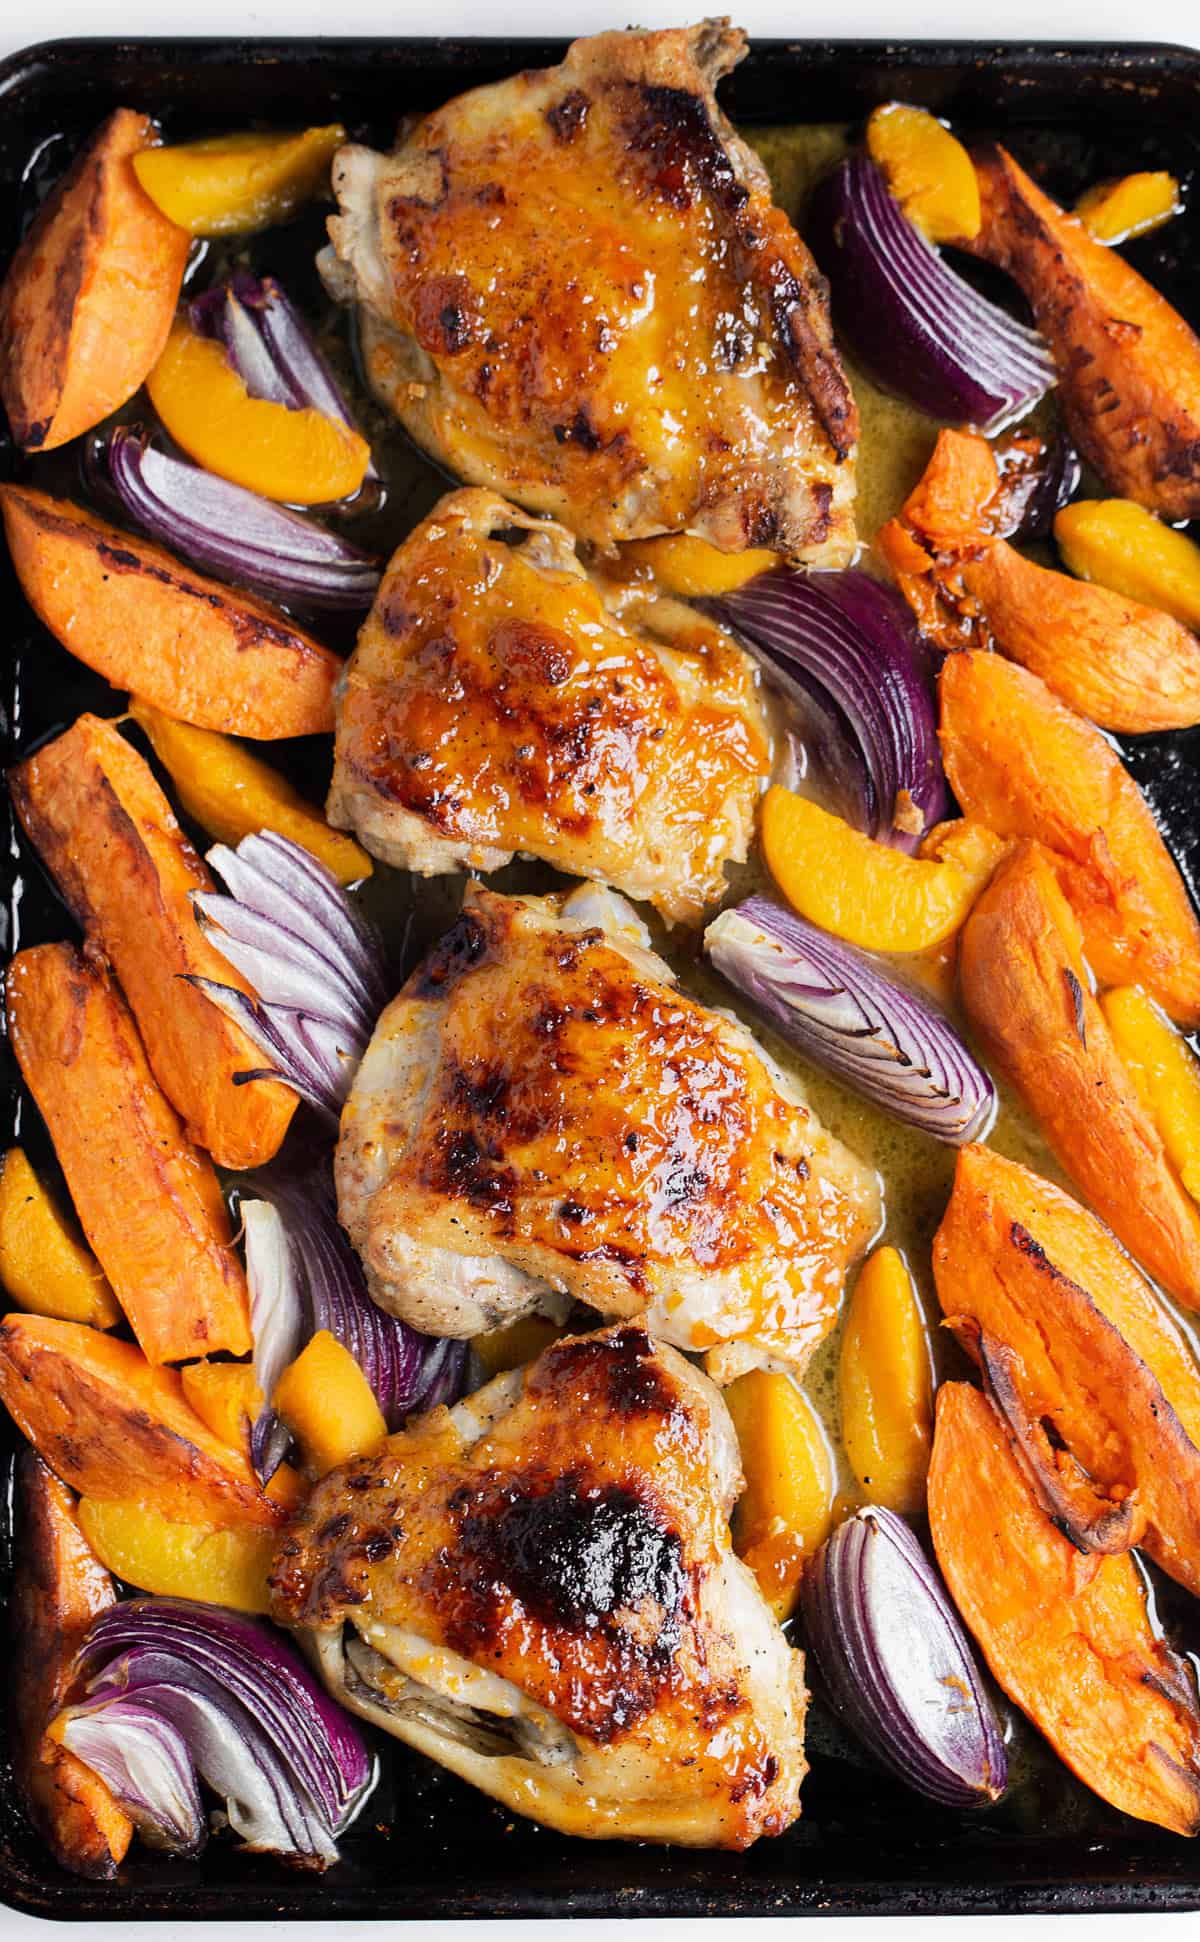 Sheet Pan Apricot Chicken and Potatoes is a quick, easy sheet pan meal that turns a few simple ingredients into an amazing meal in only 30 minutes!   baked chicken thighs | apricot chicken | sheet pan chicken recipes